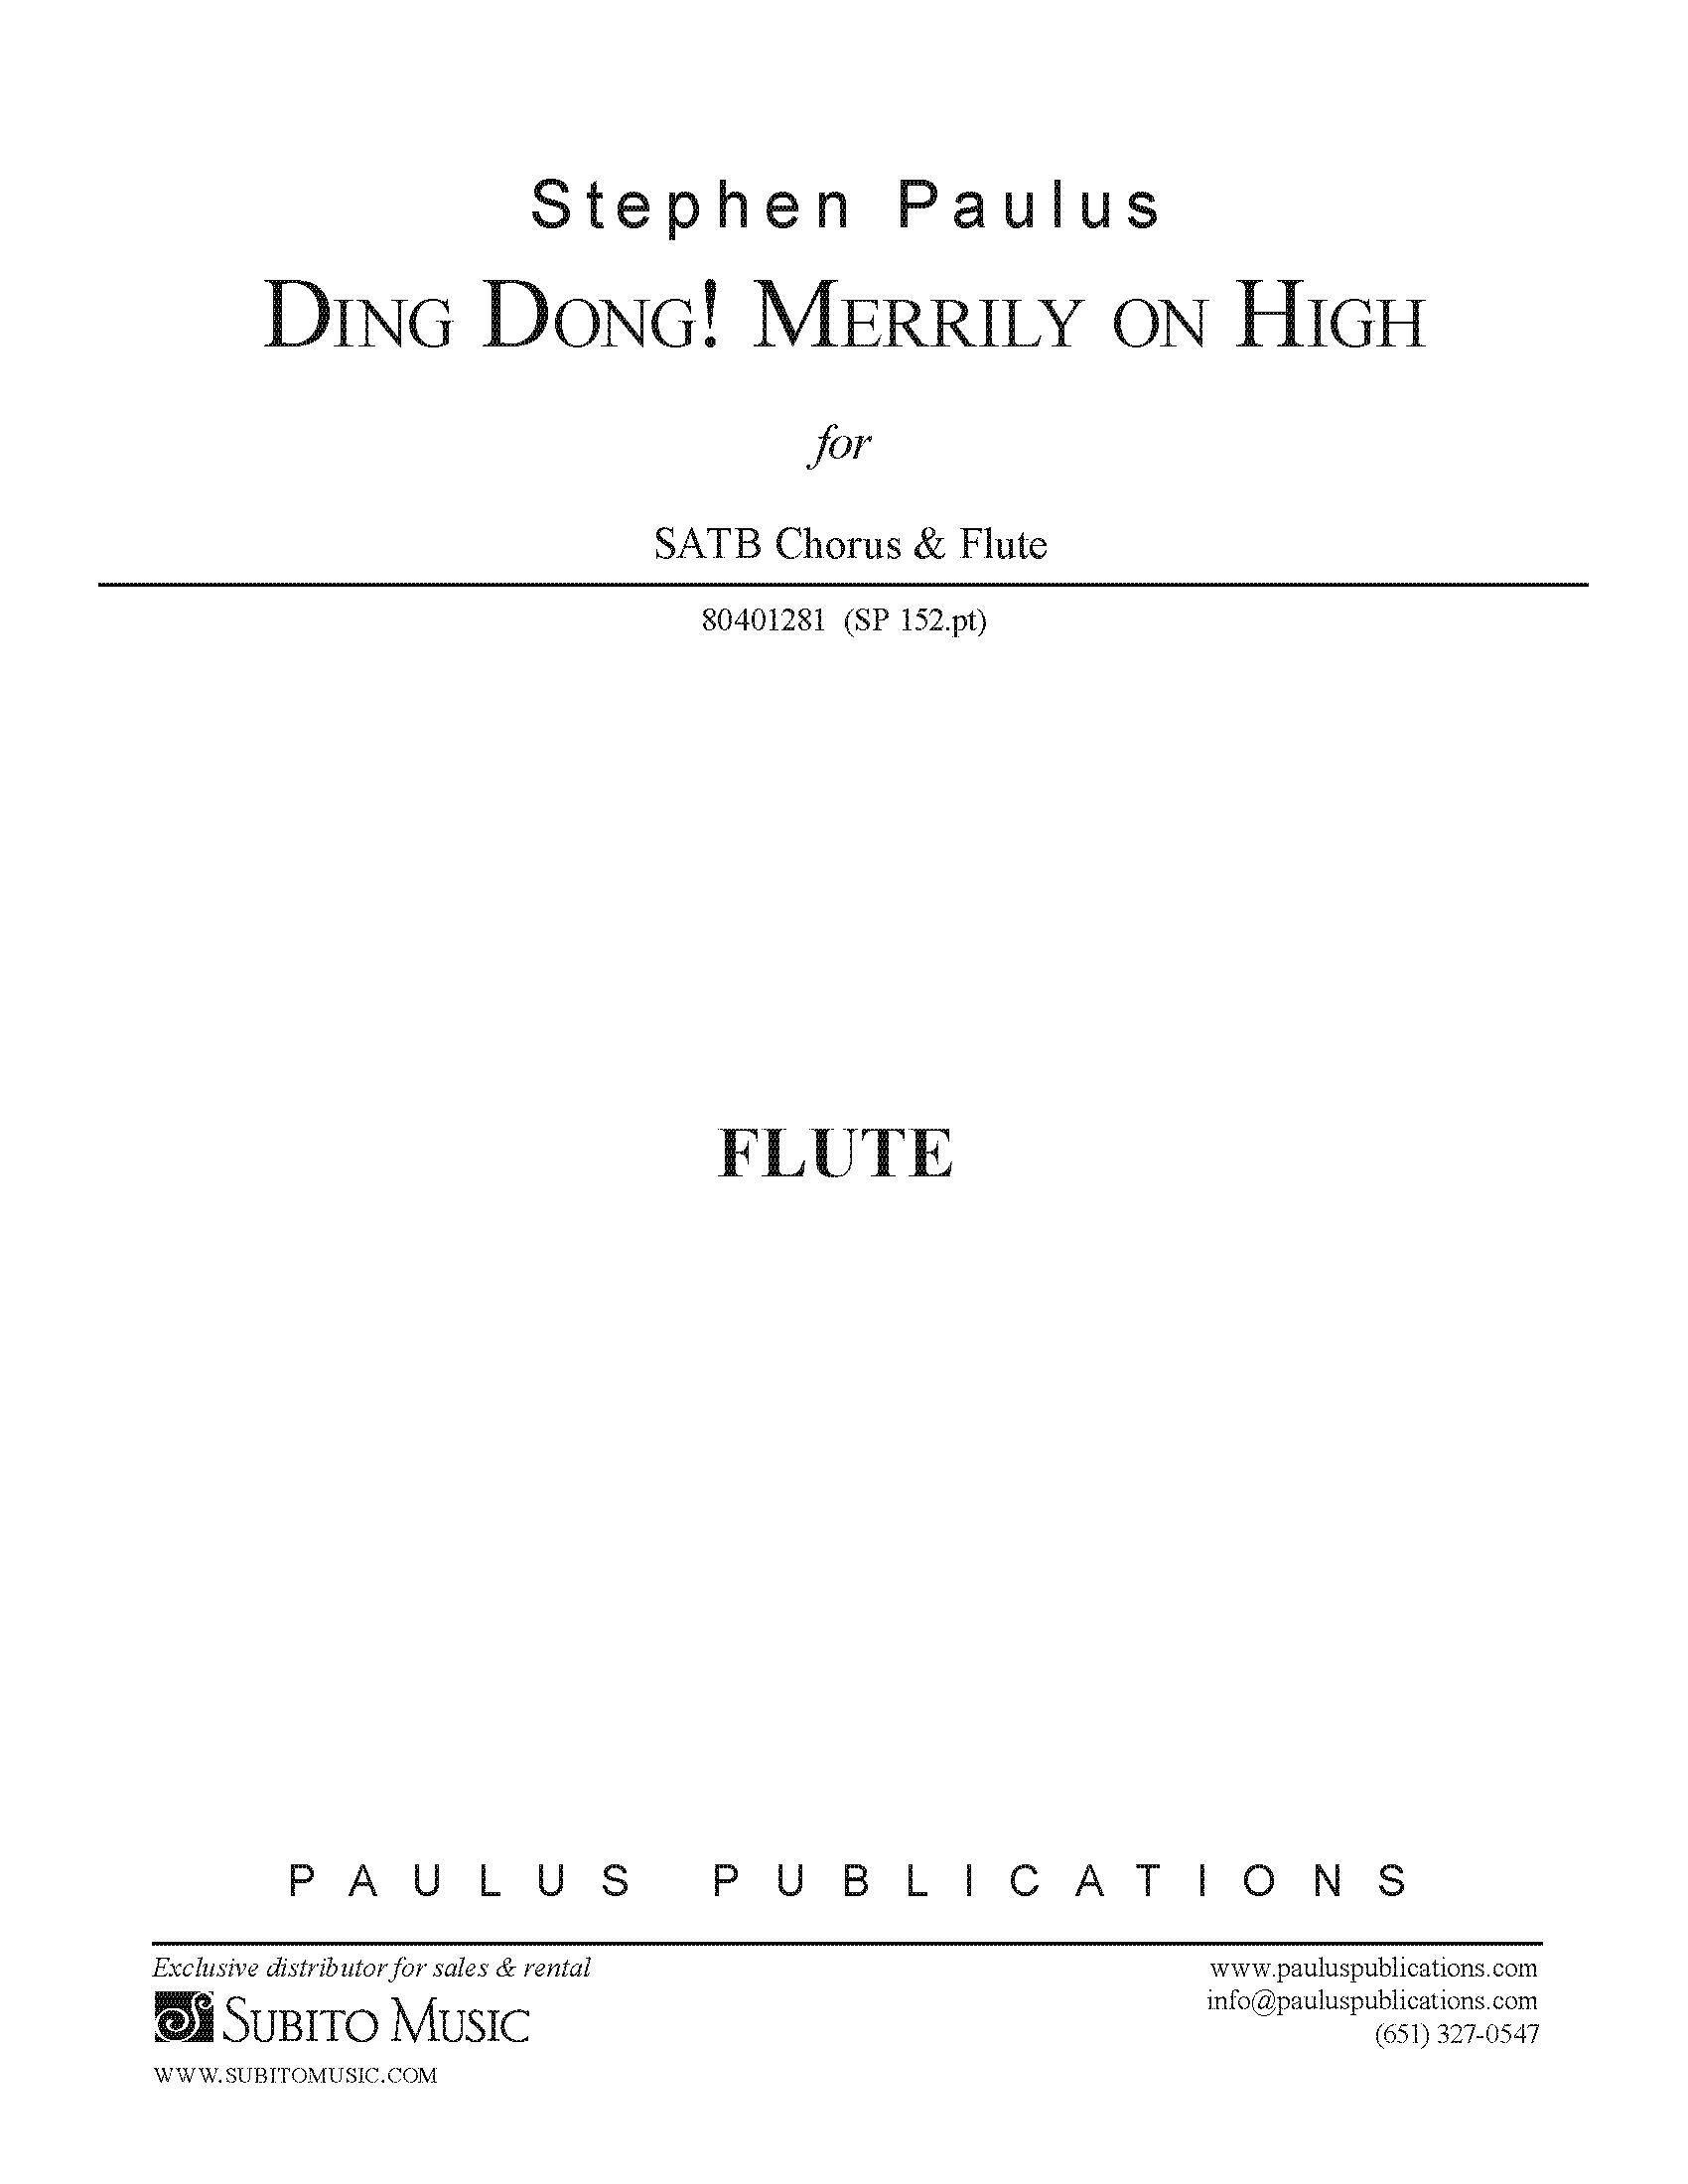 Ding Dong! Merrily on High - FLUTE PART - Click Image to Close